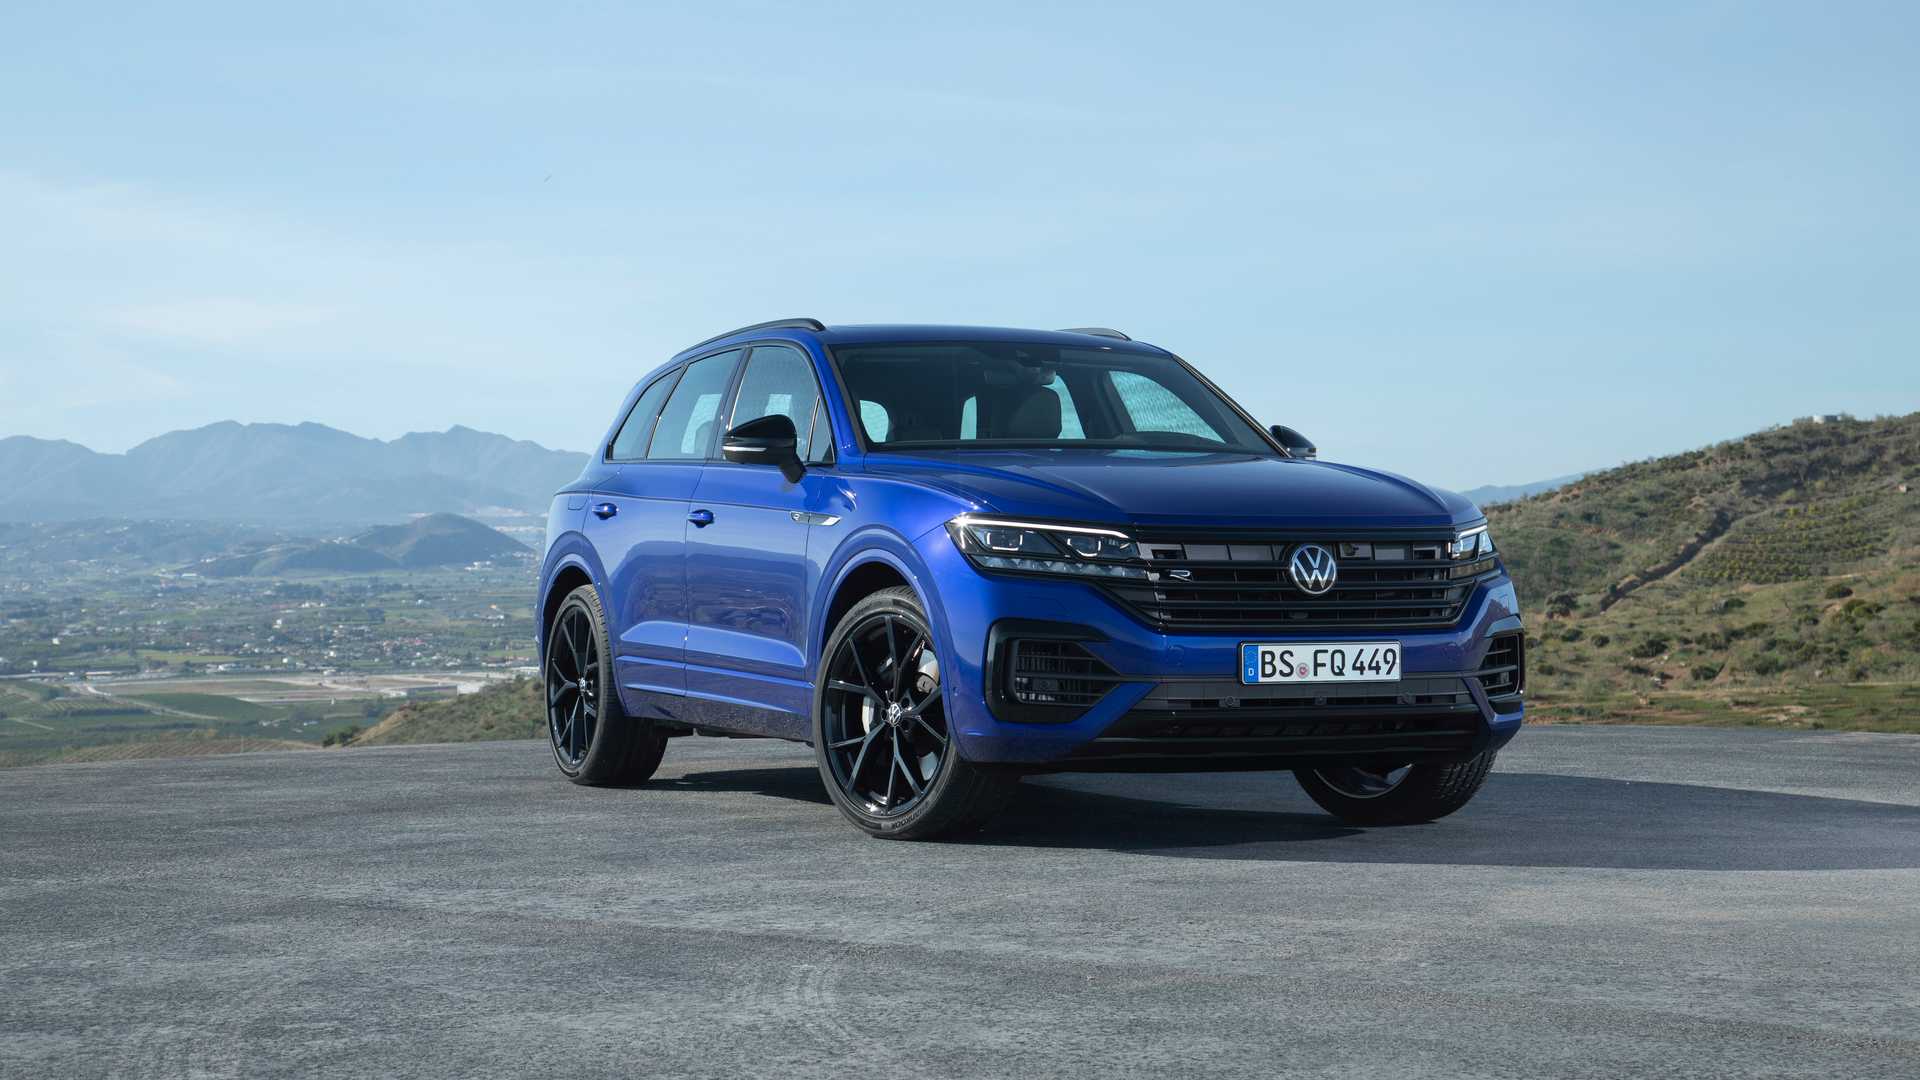 Official Rendering of the All New Volkswagen Touareg 